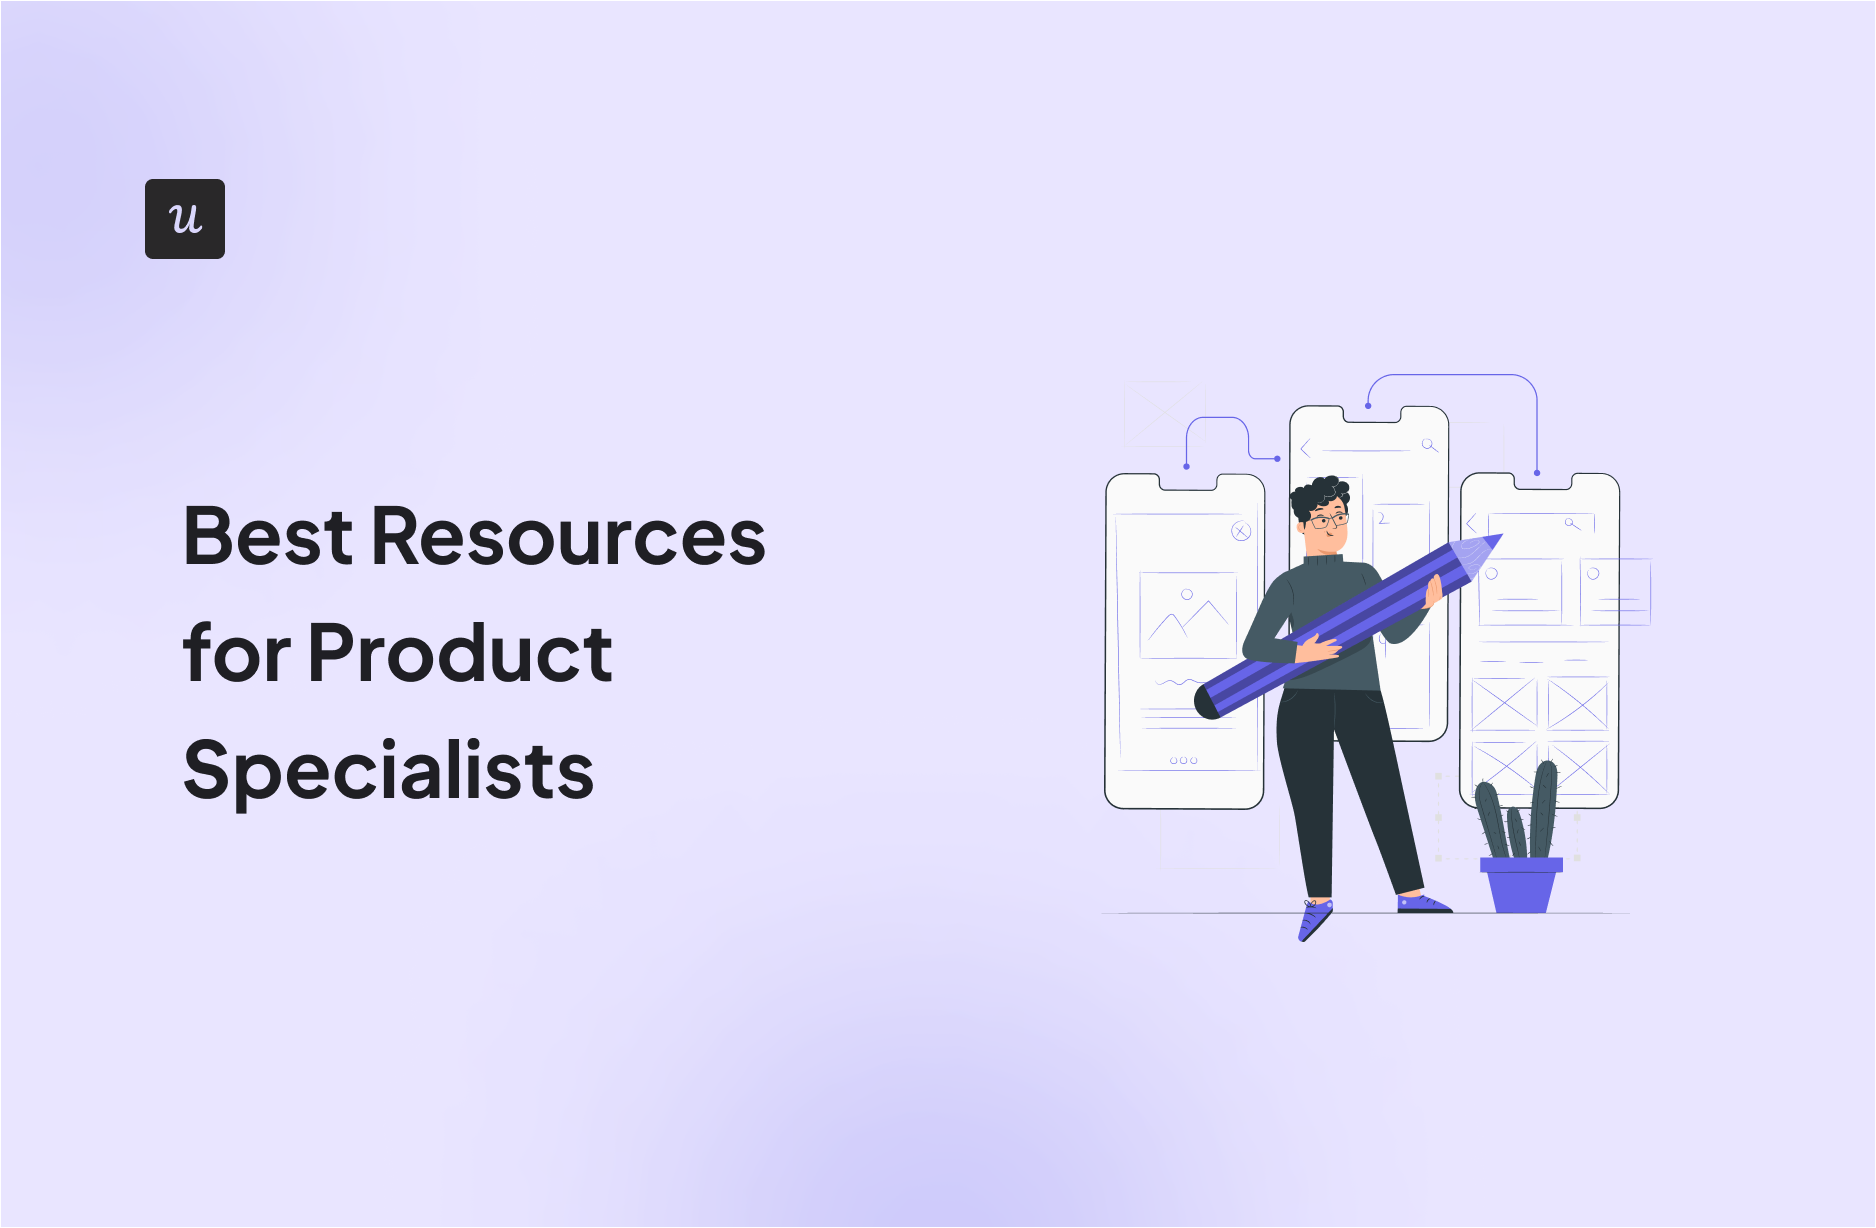 Best Resources for Product Specialists